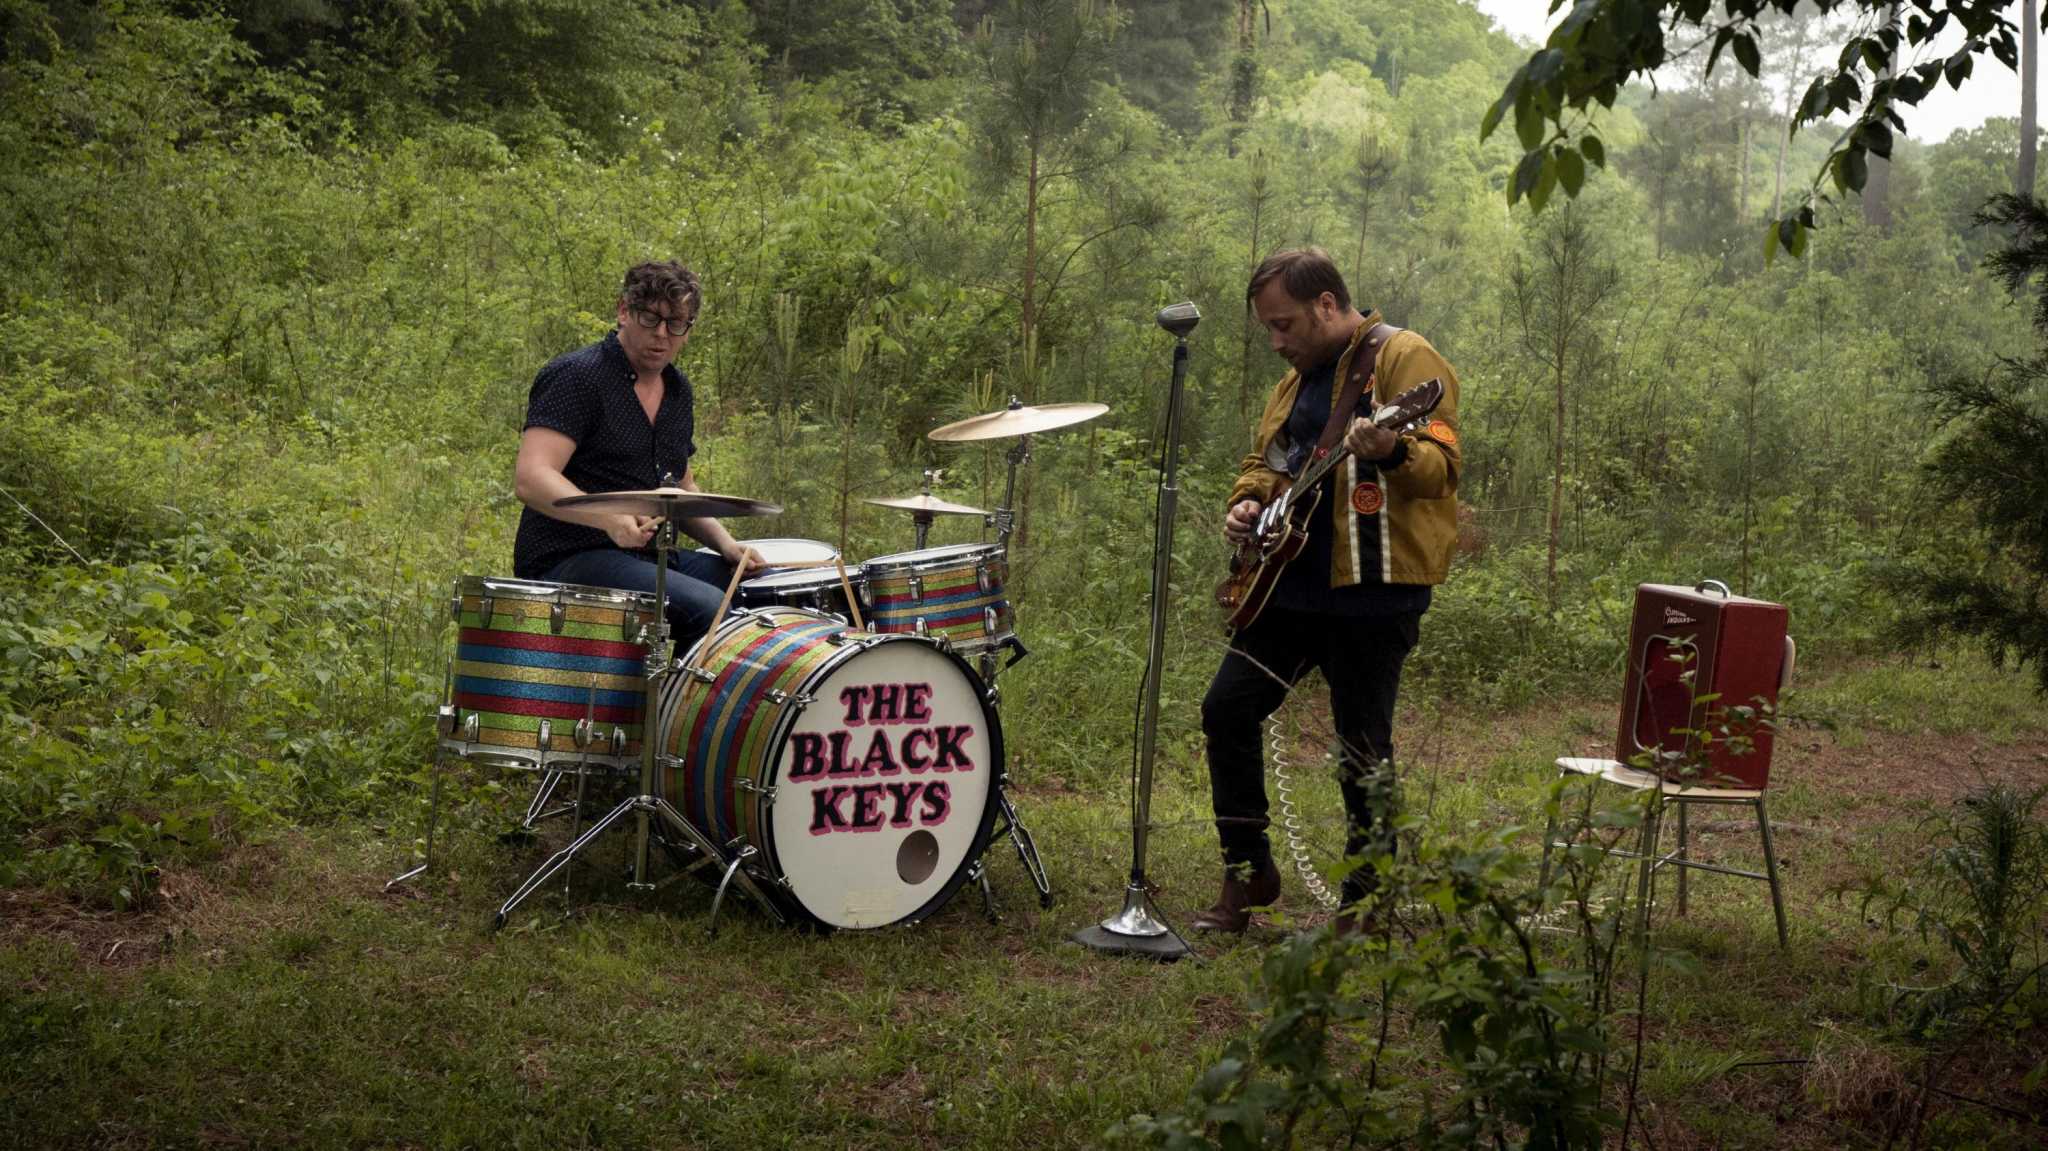 We're The Black Keys, a rock band from Akron, Ohio. We just